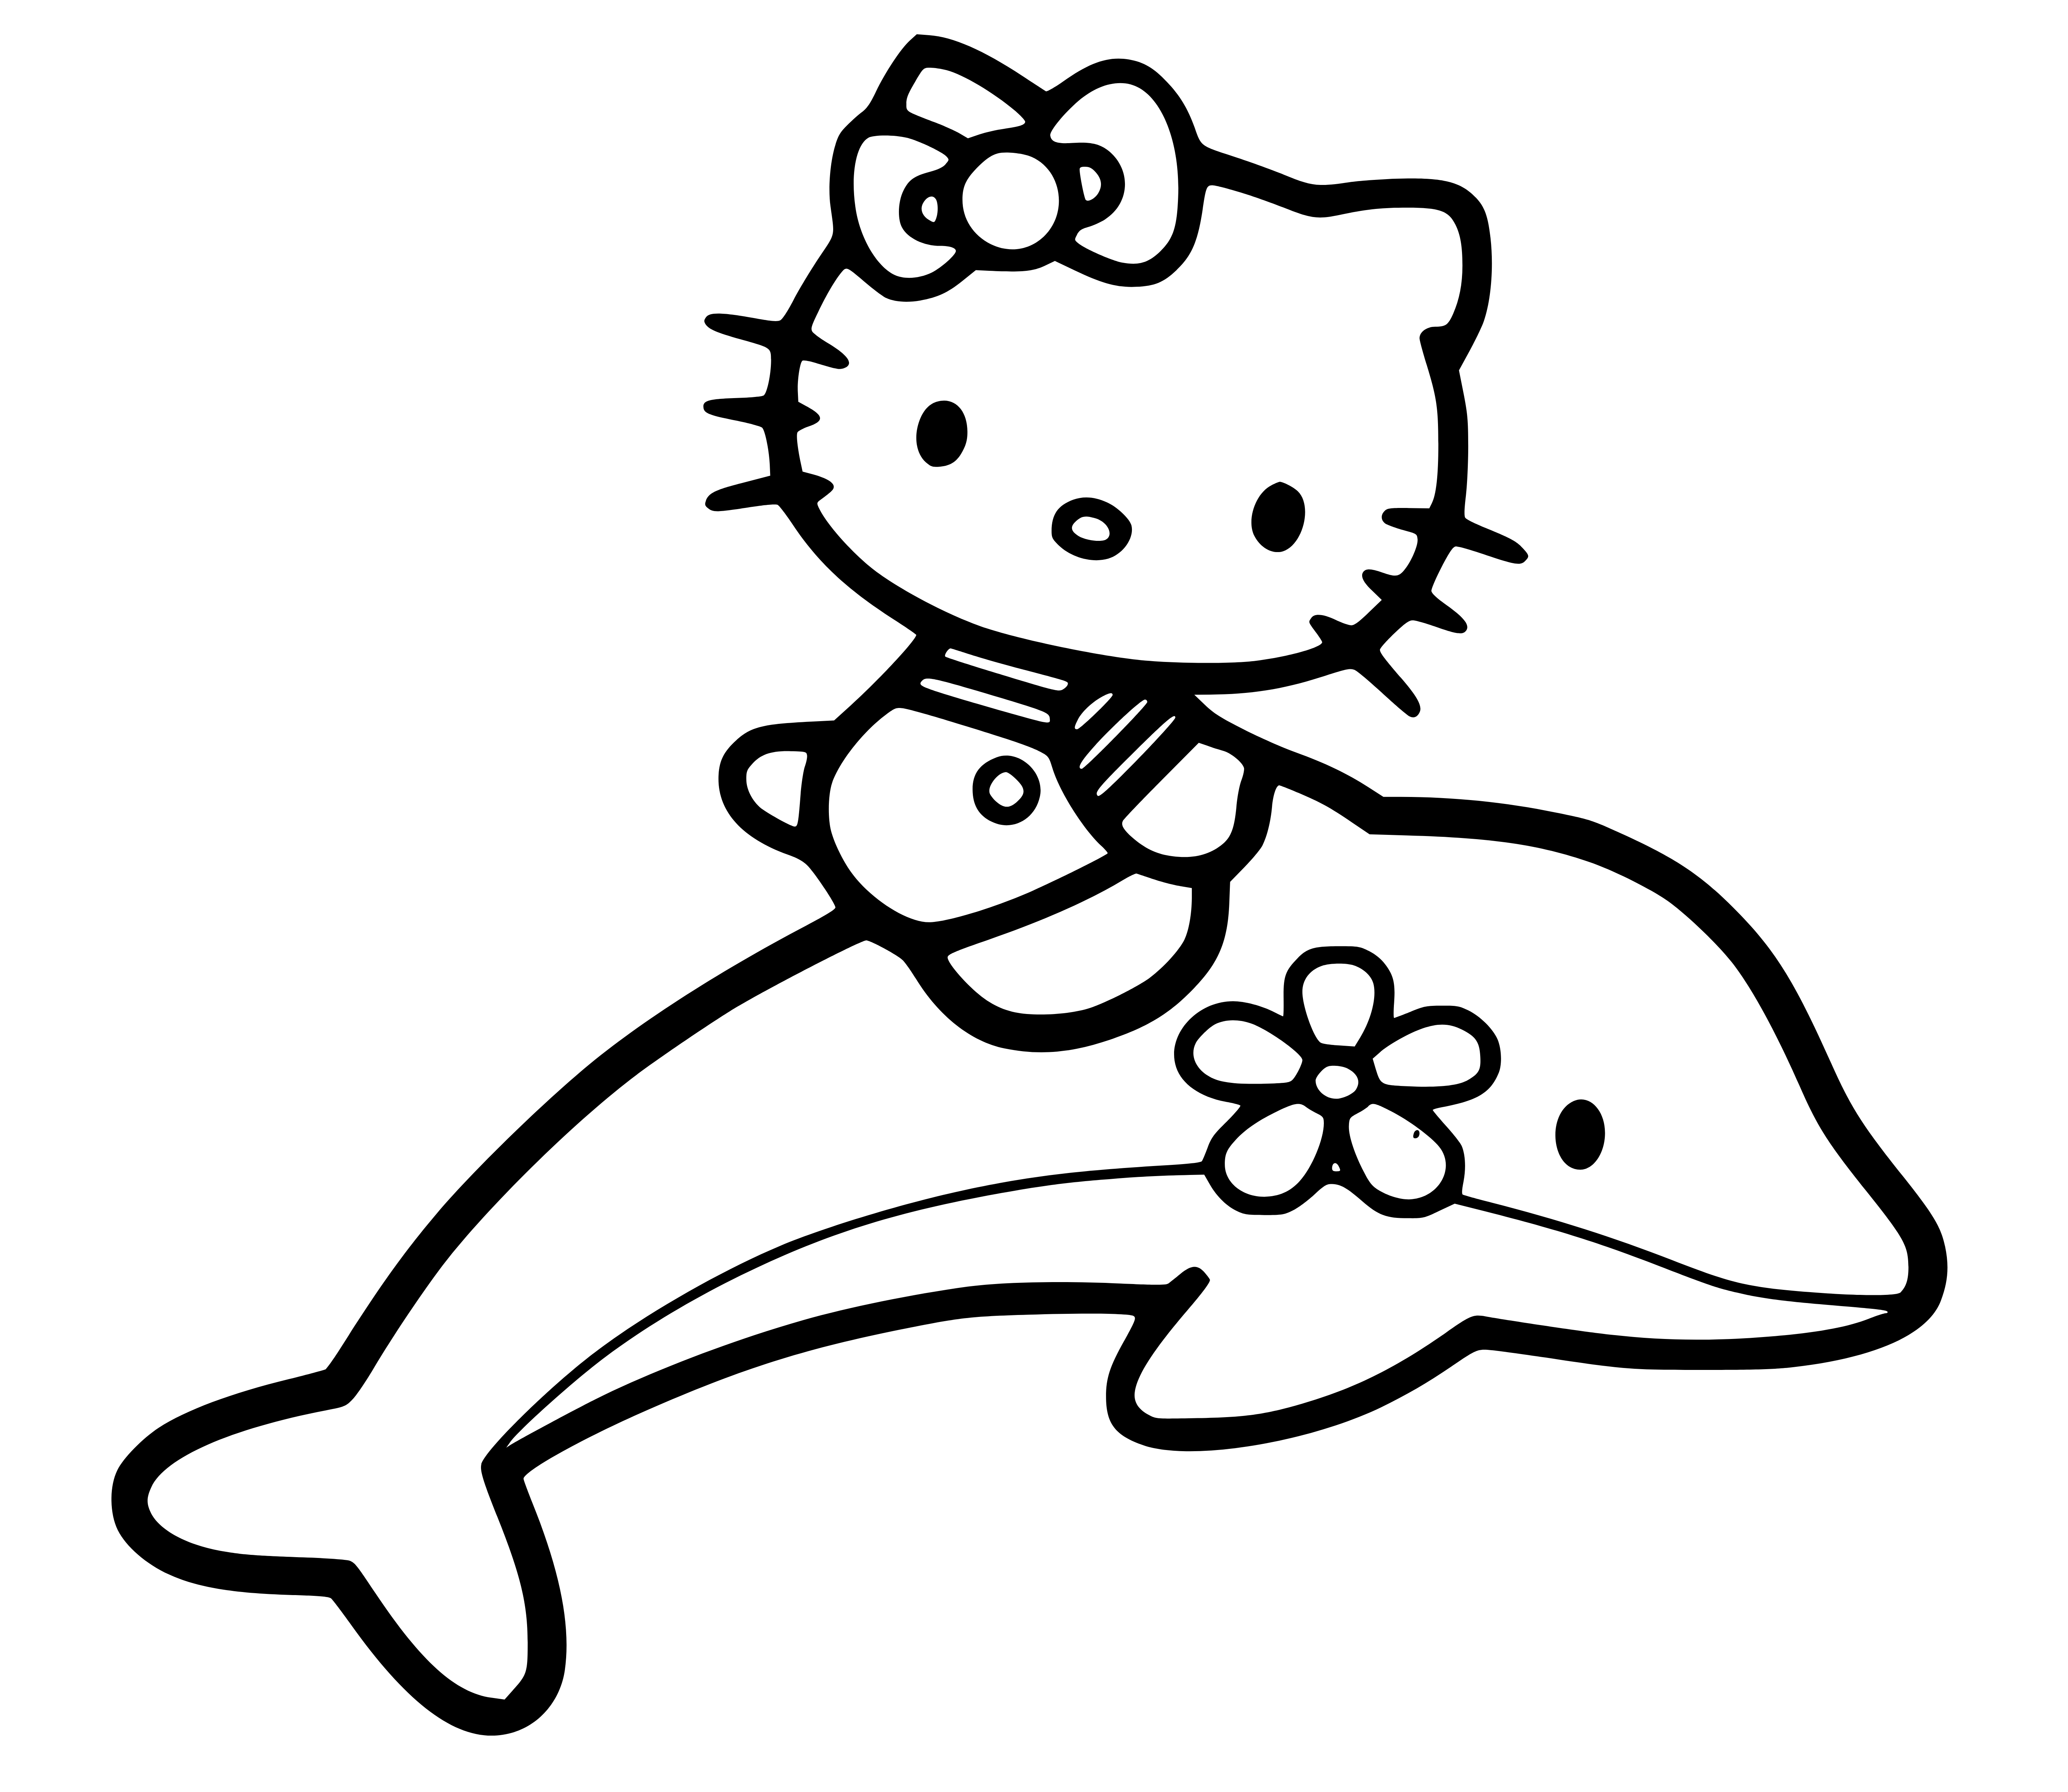 Printable Hello Kitty Dolphin Coloring Page for kids.